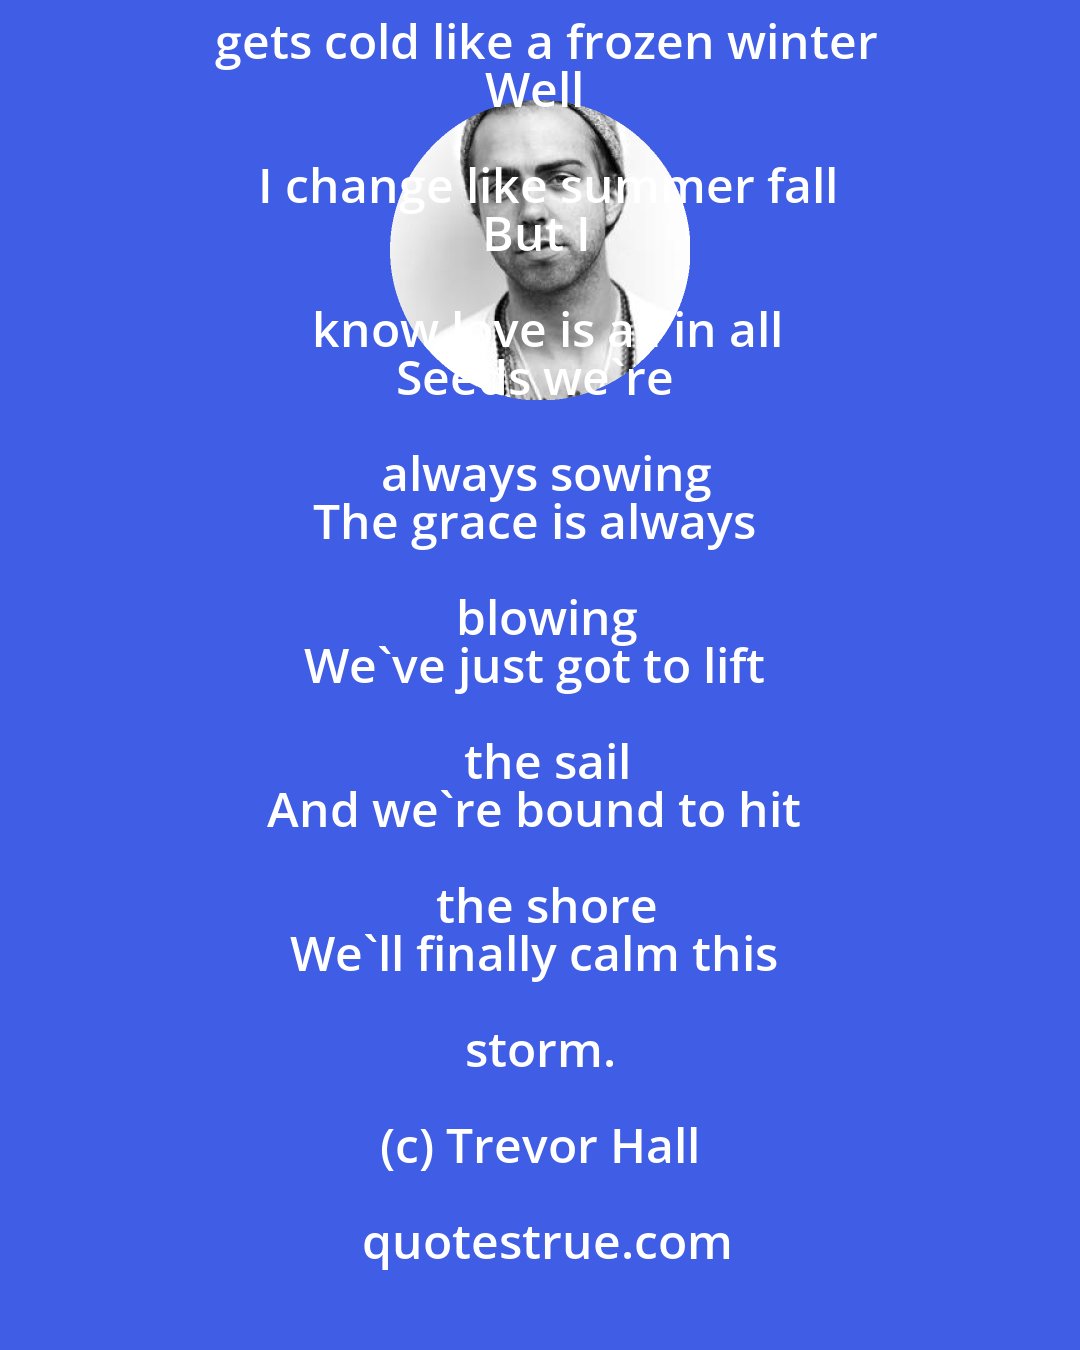 Trevor Hall: The world keeps turnin' 
It gets merry like a merry go 'round
It gets cold like a frozen winter
Well I change like summer fall
But I know love is all in all
Seeds we're always sowing
The grace is always blowing
We've just got to lift the sail
And we're bound to hit the shore
We'll finally calm this storm.